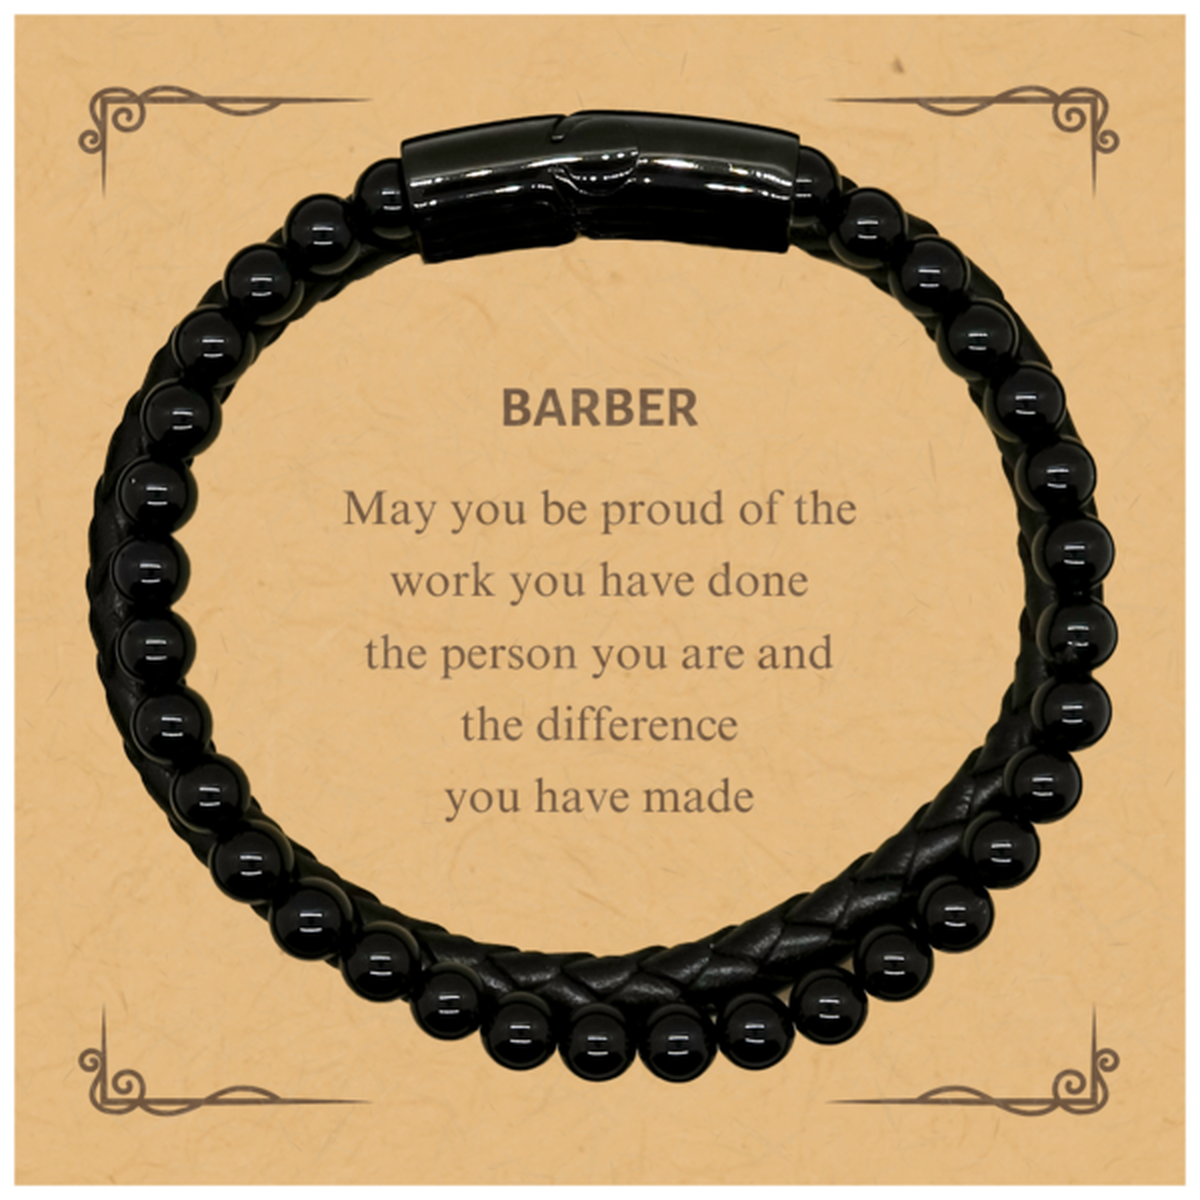 Barber May you be proud of the work you have done, Retirement Barber Stone Leather Bracelets for Colleague Appreciation Gifts Amazing for Barber